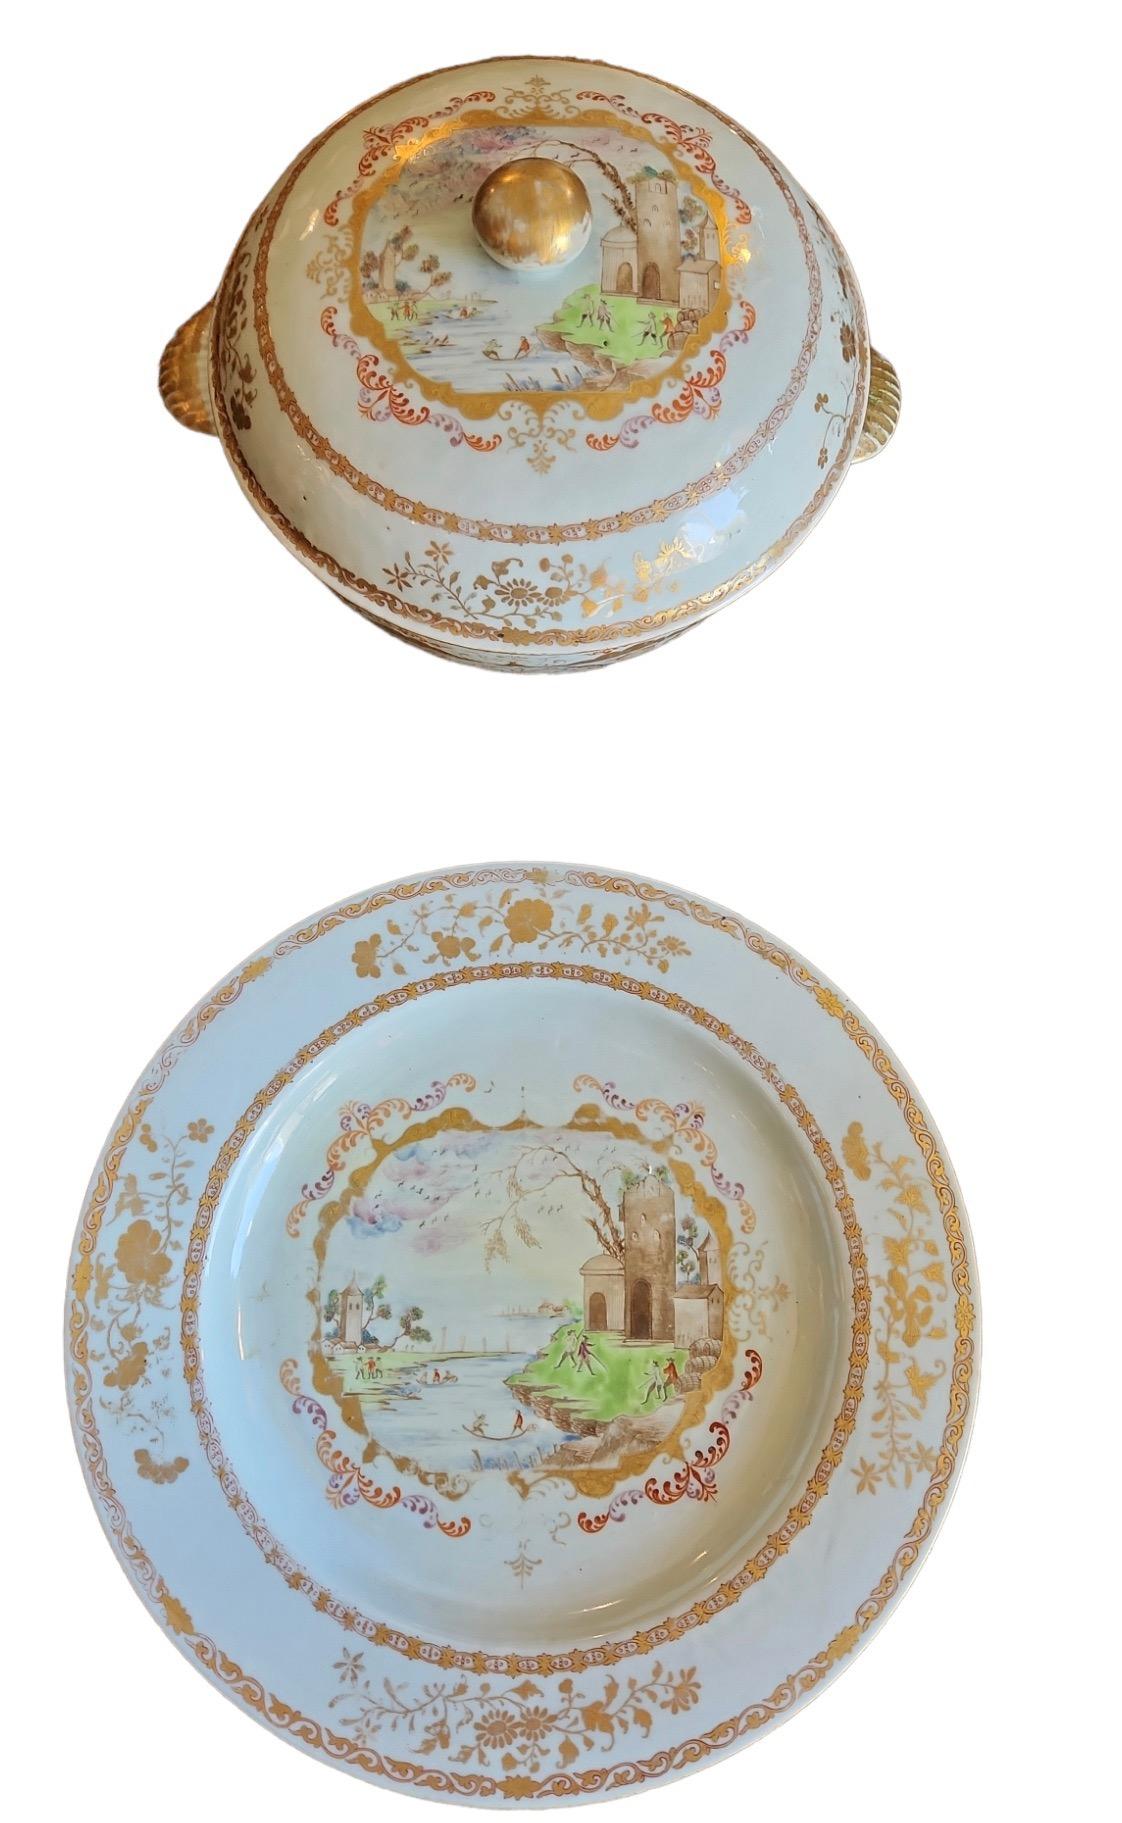 In the style of Meissen. Quinlong period. 1750. Stand and tureen base with minor restorations. European-inspired scenes. Platter diameter is 14